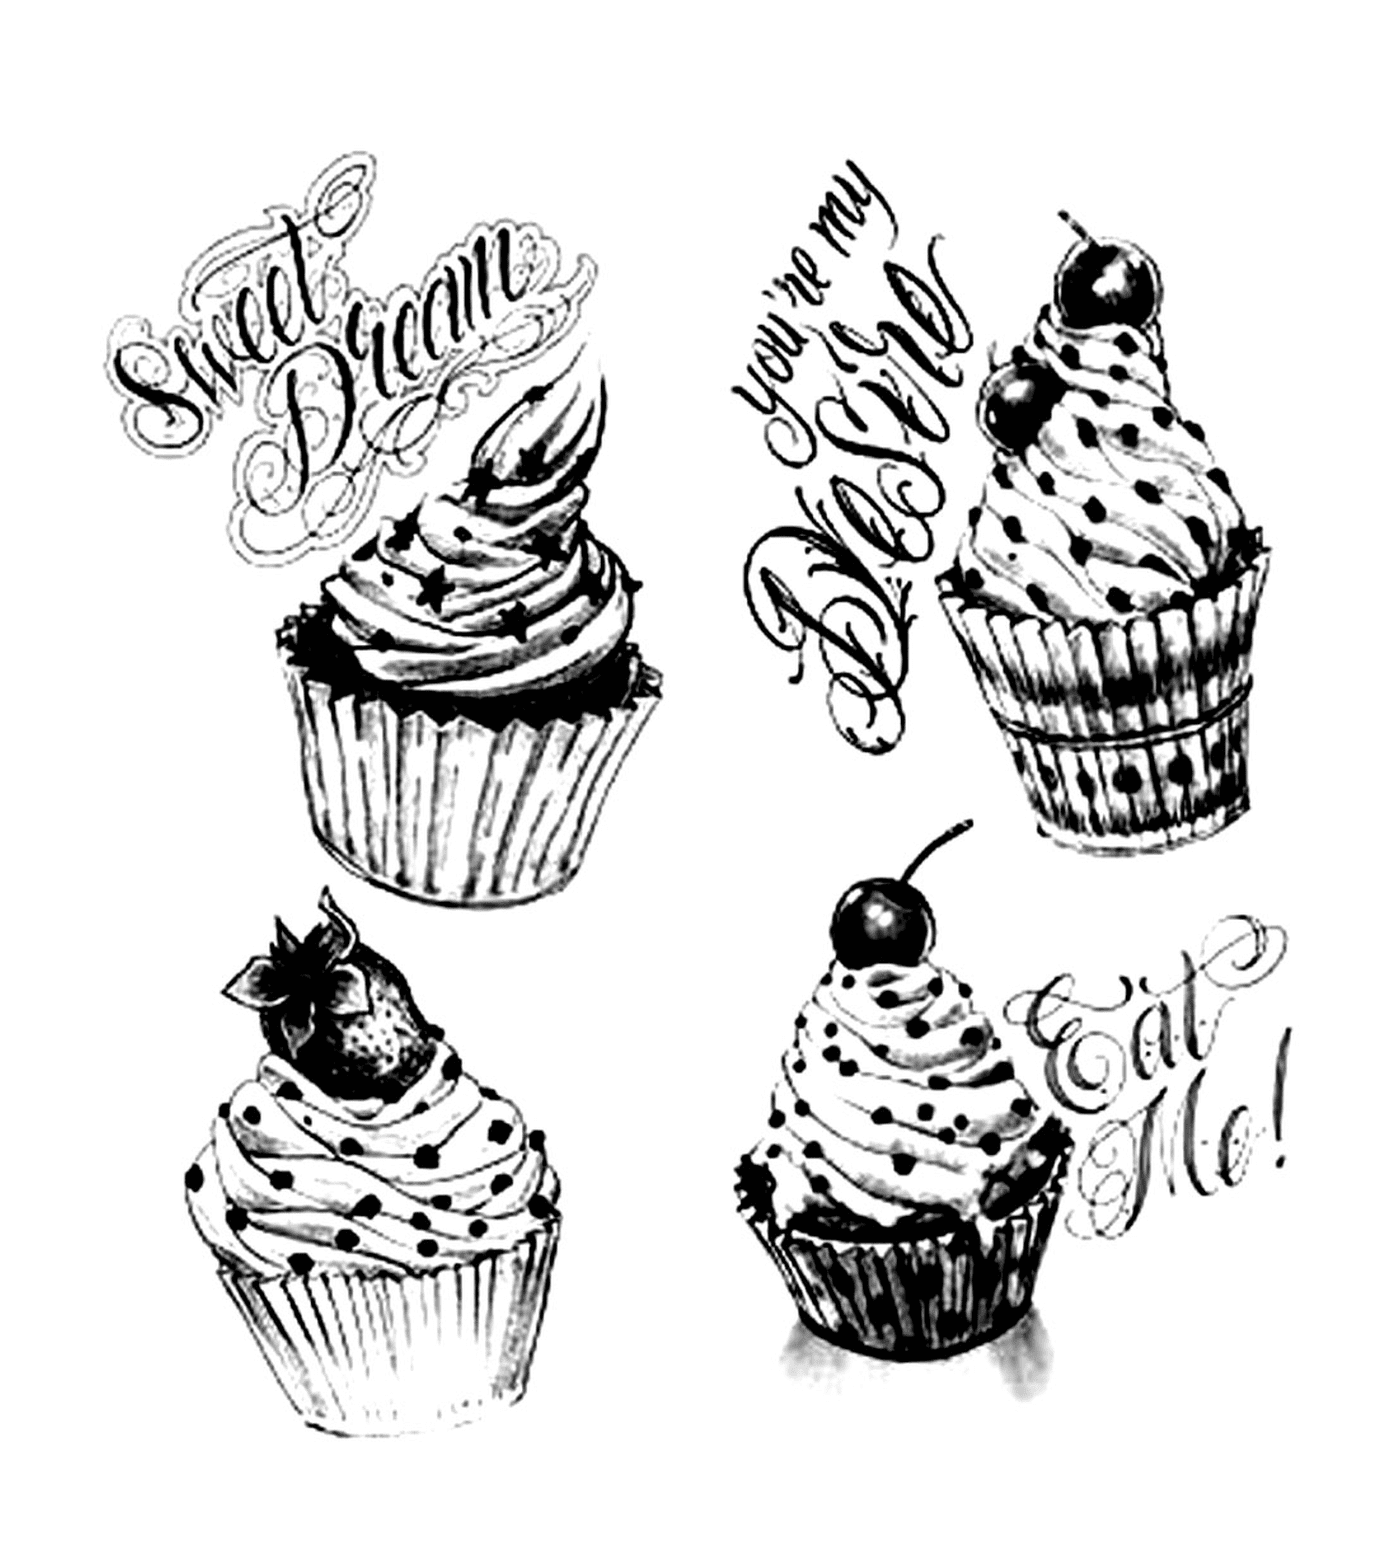  Vintage cupcakes for adults, designed 